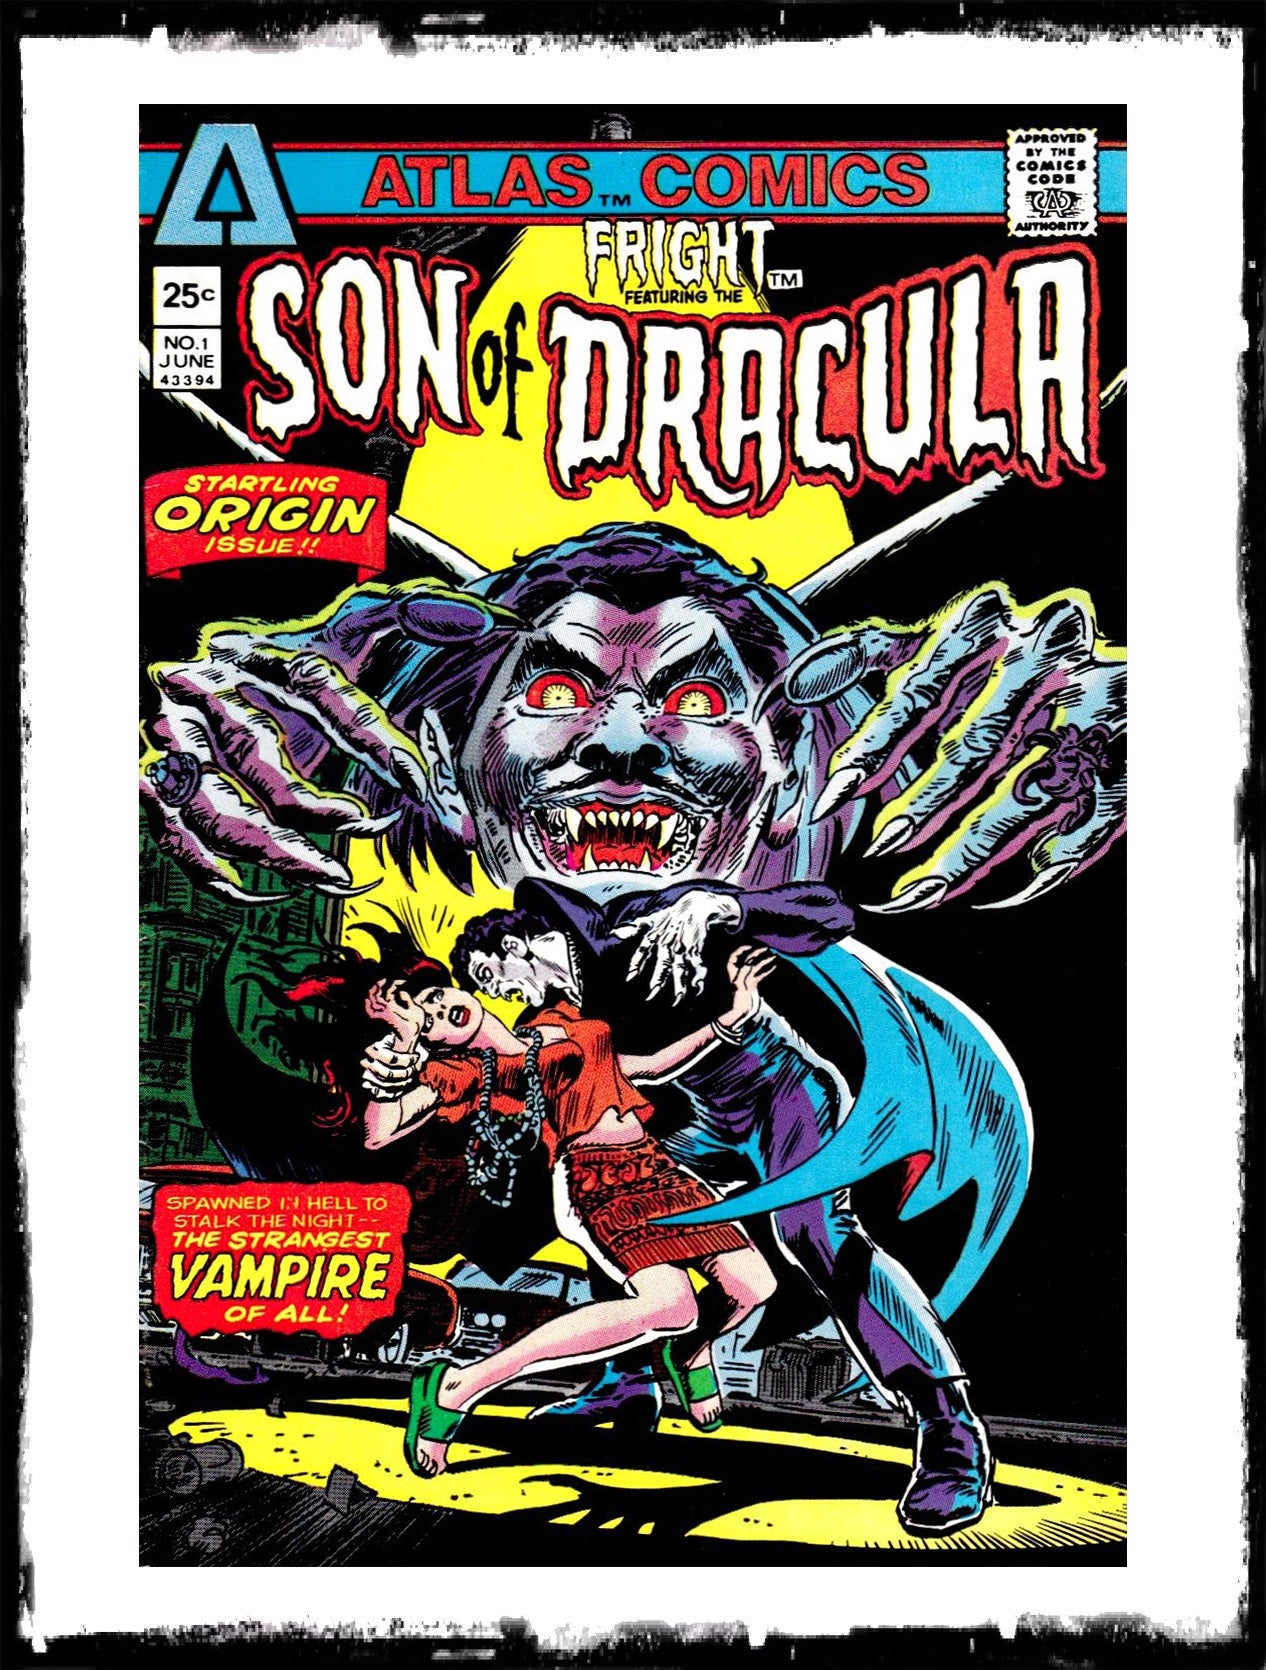 FRIGHT: SON OF DRACULA - #1 1ST APP OF THE SON OF DRACULA (1975 - VF+)